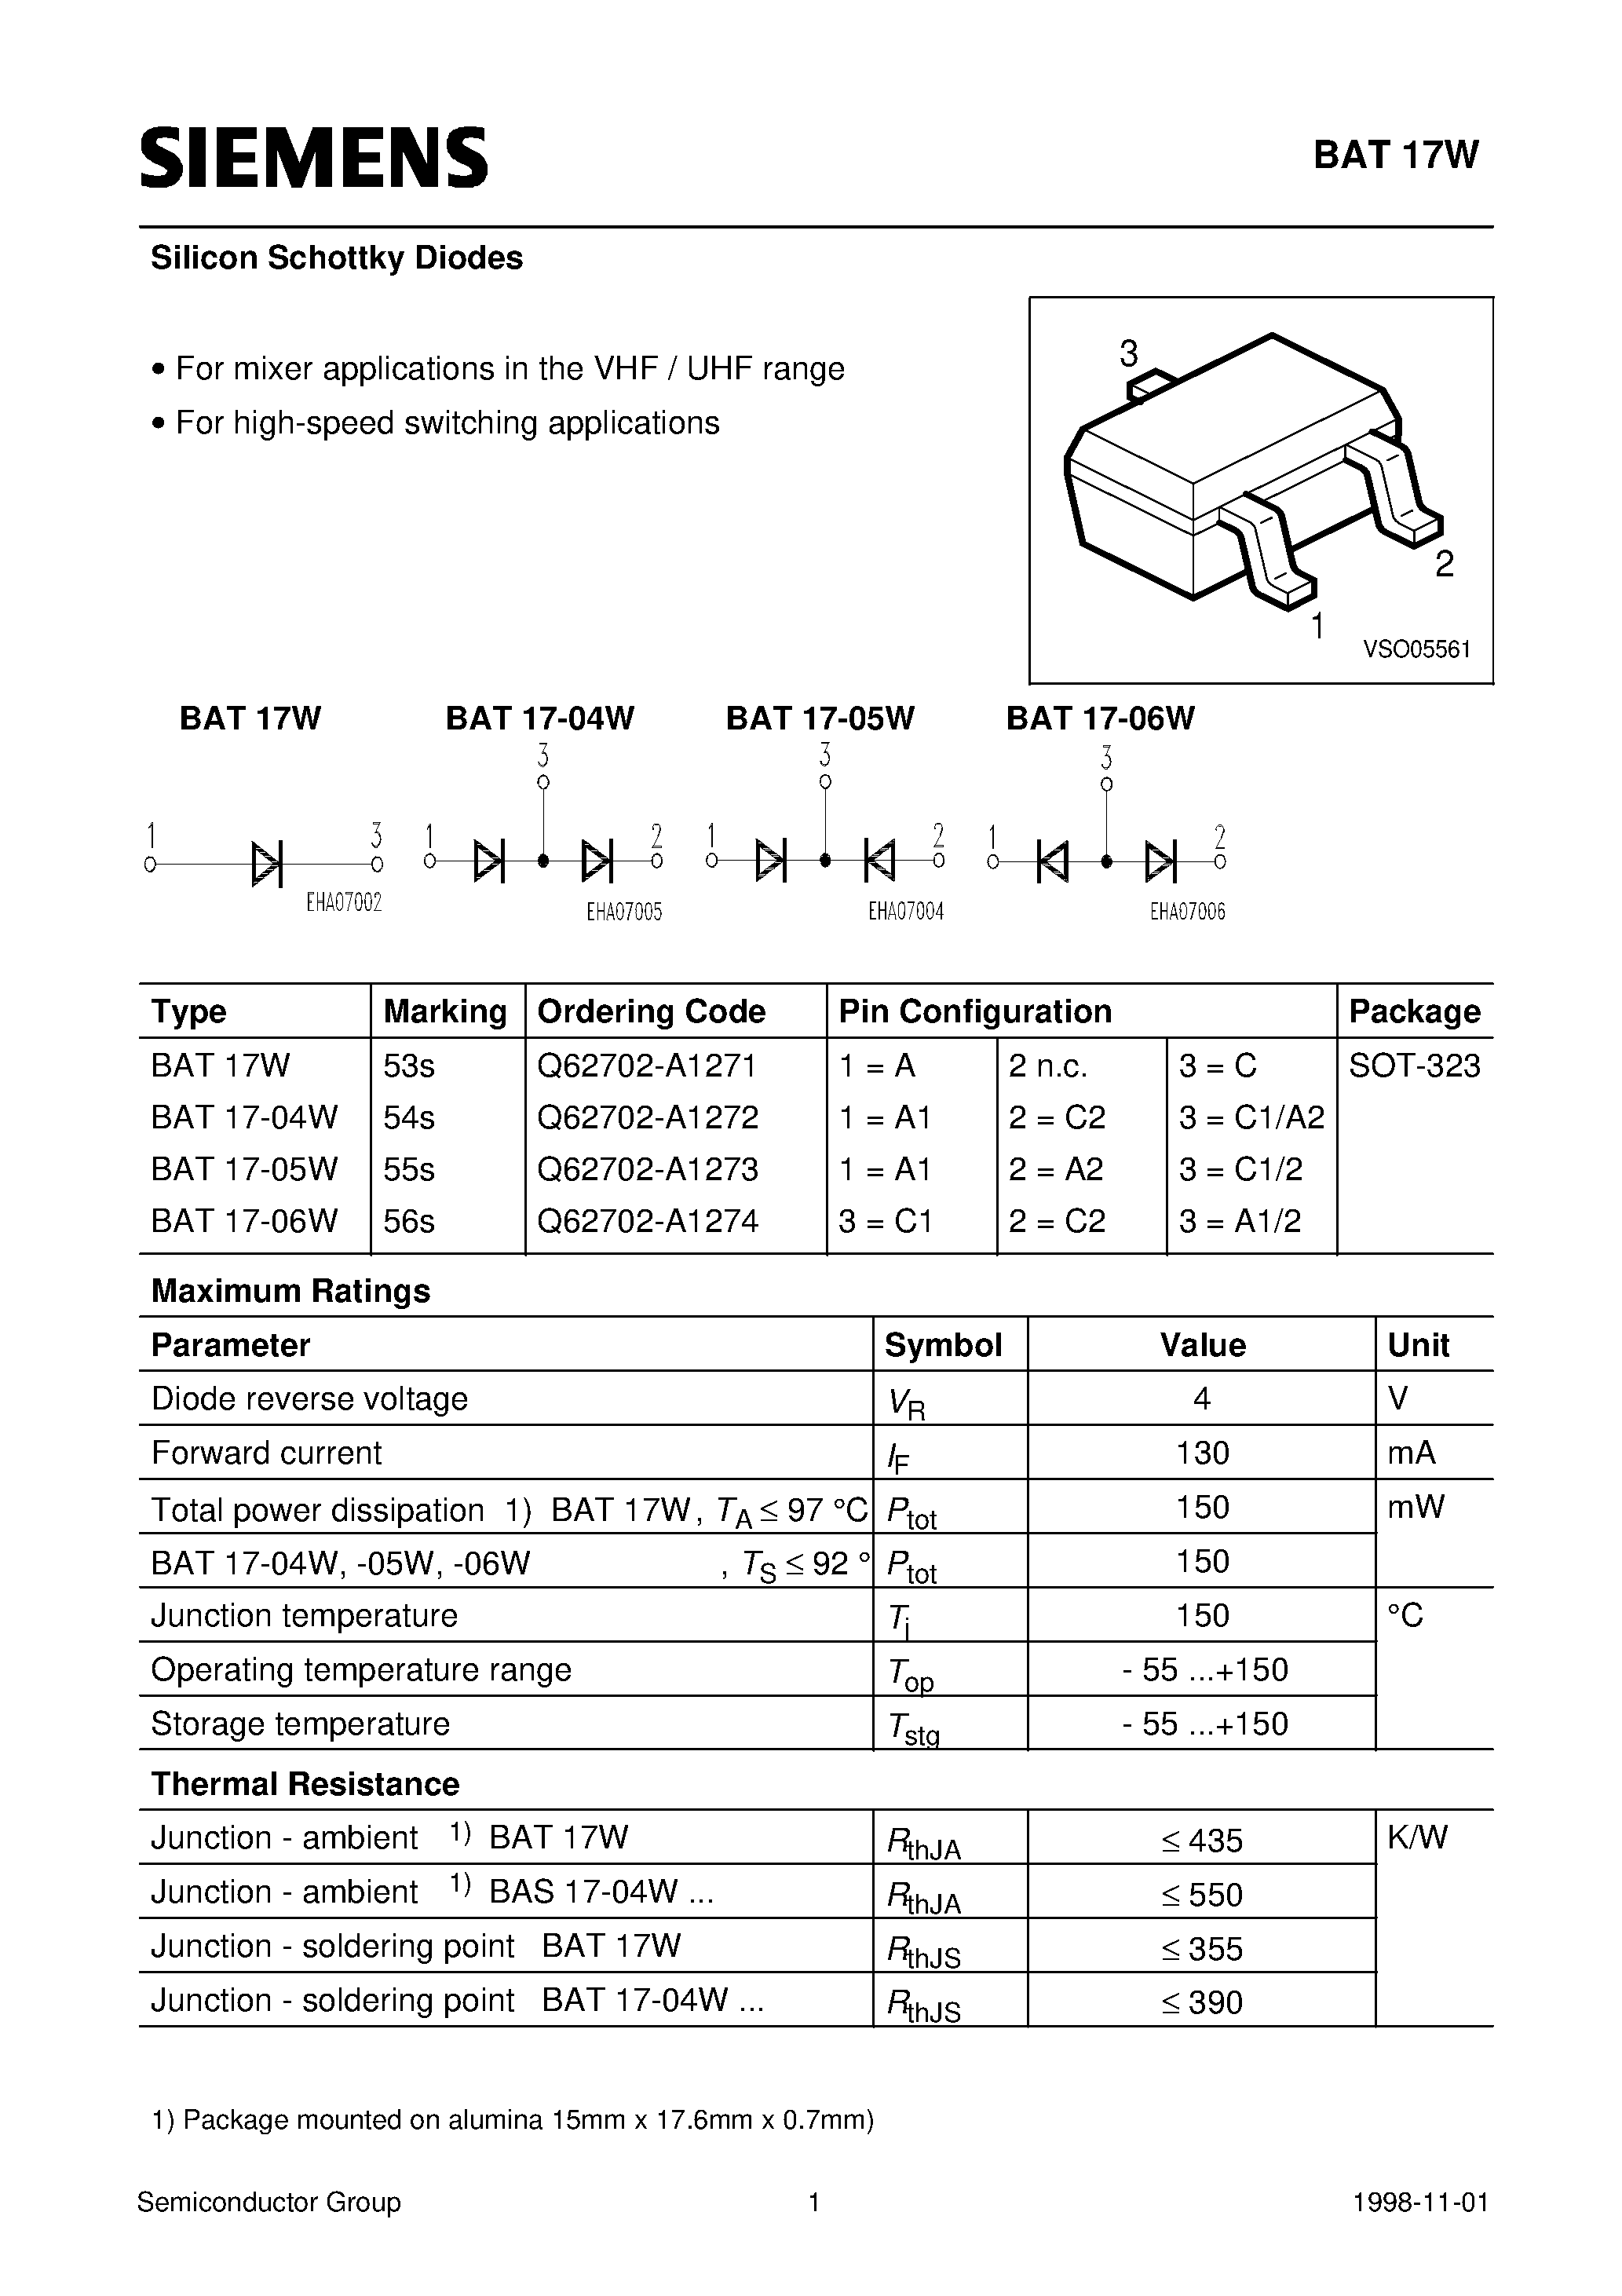 Datasheet BAT17-05W - Silicon Schottky Diodes (For mixer applications in the VHF / UHF range For high-speed switching applications) page 1